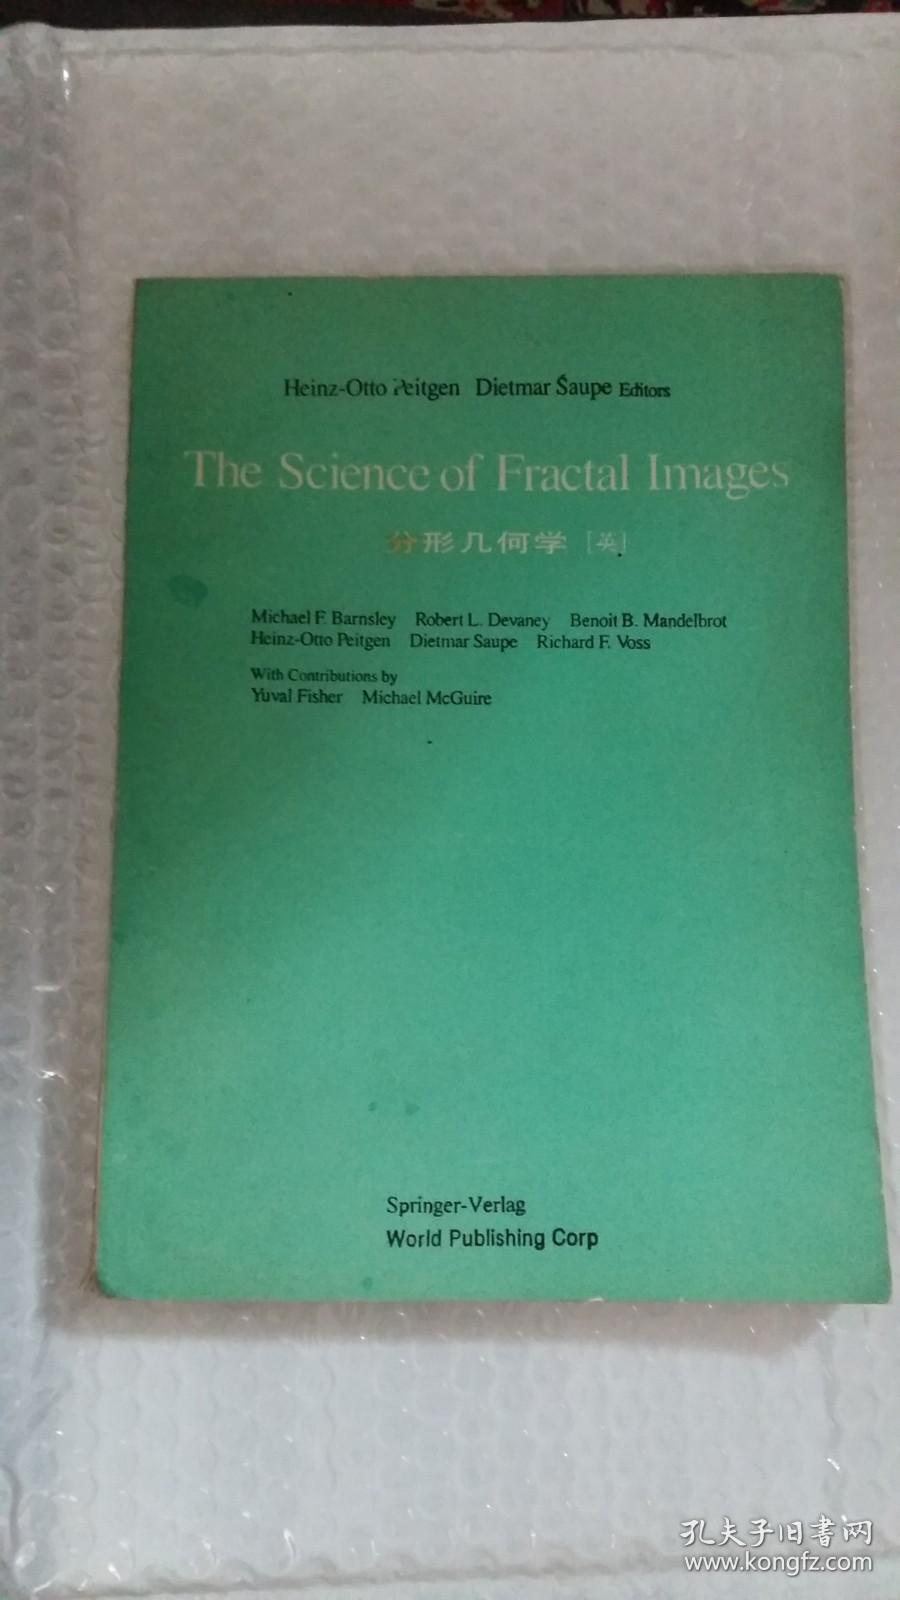 The Science of Fractal Images分形几何学（英）